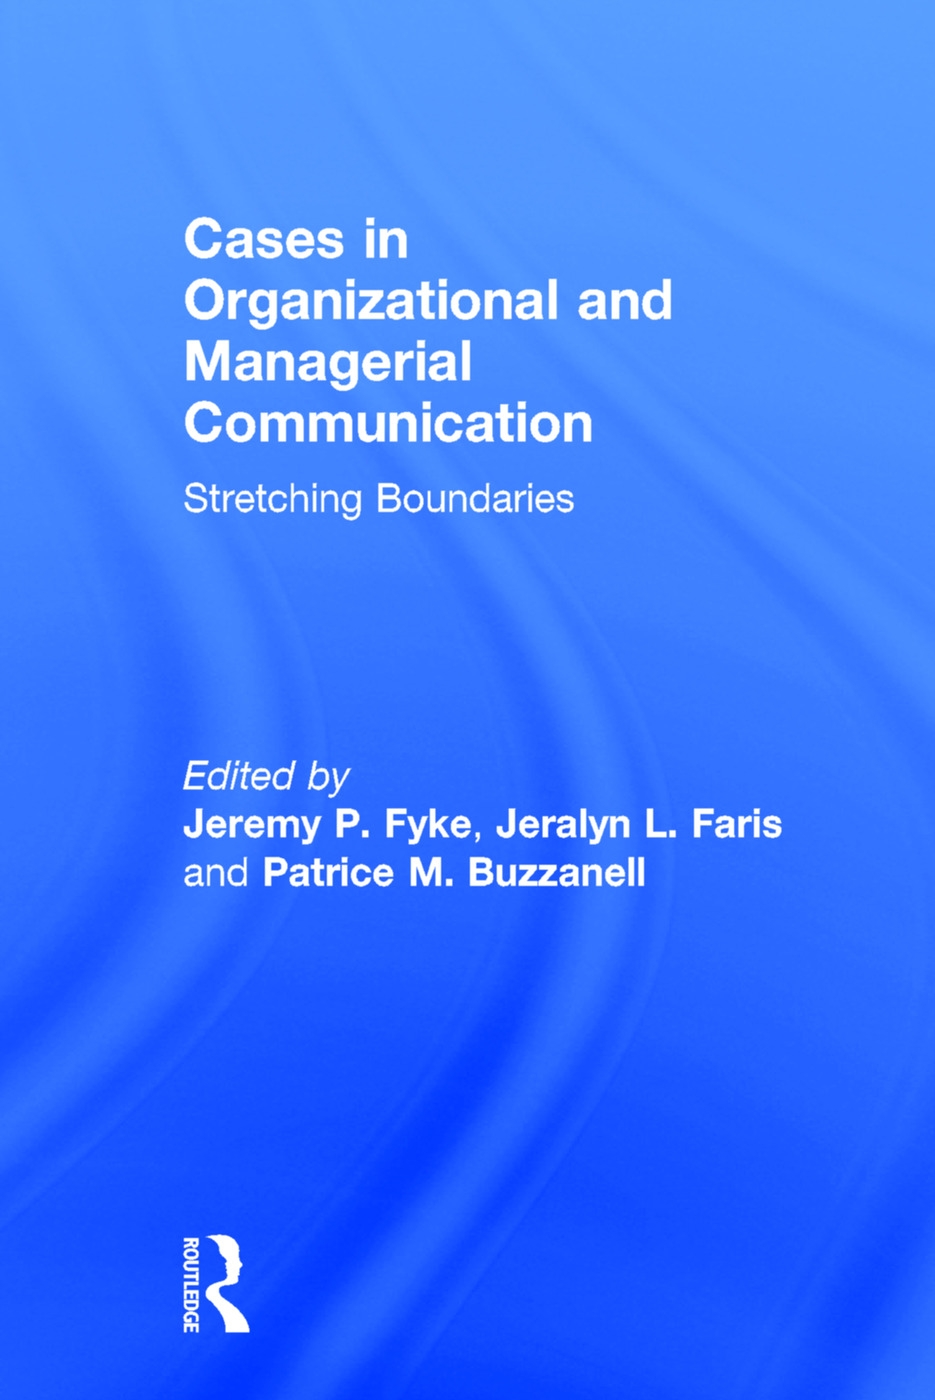 Cases in Organizational and Managerial Communication: Streching Boundaries